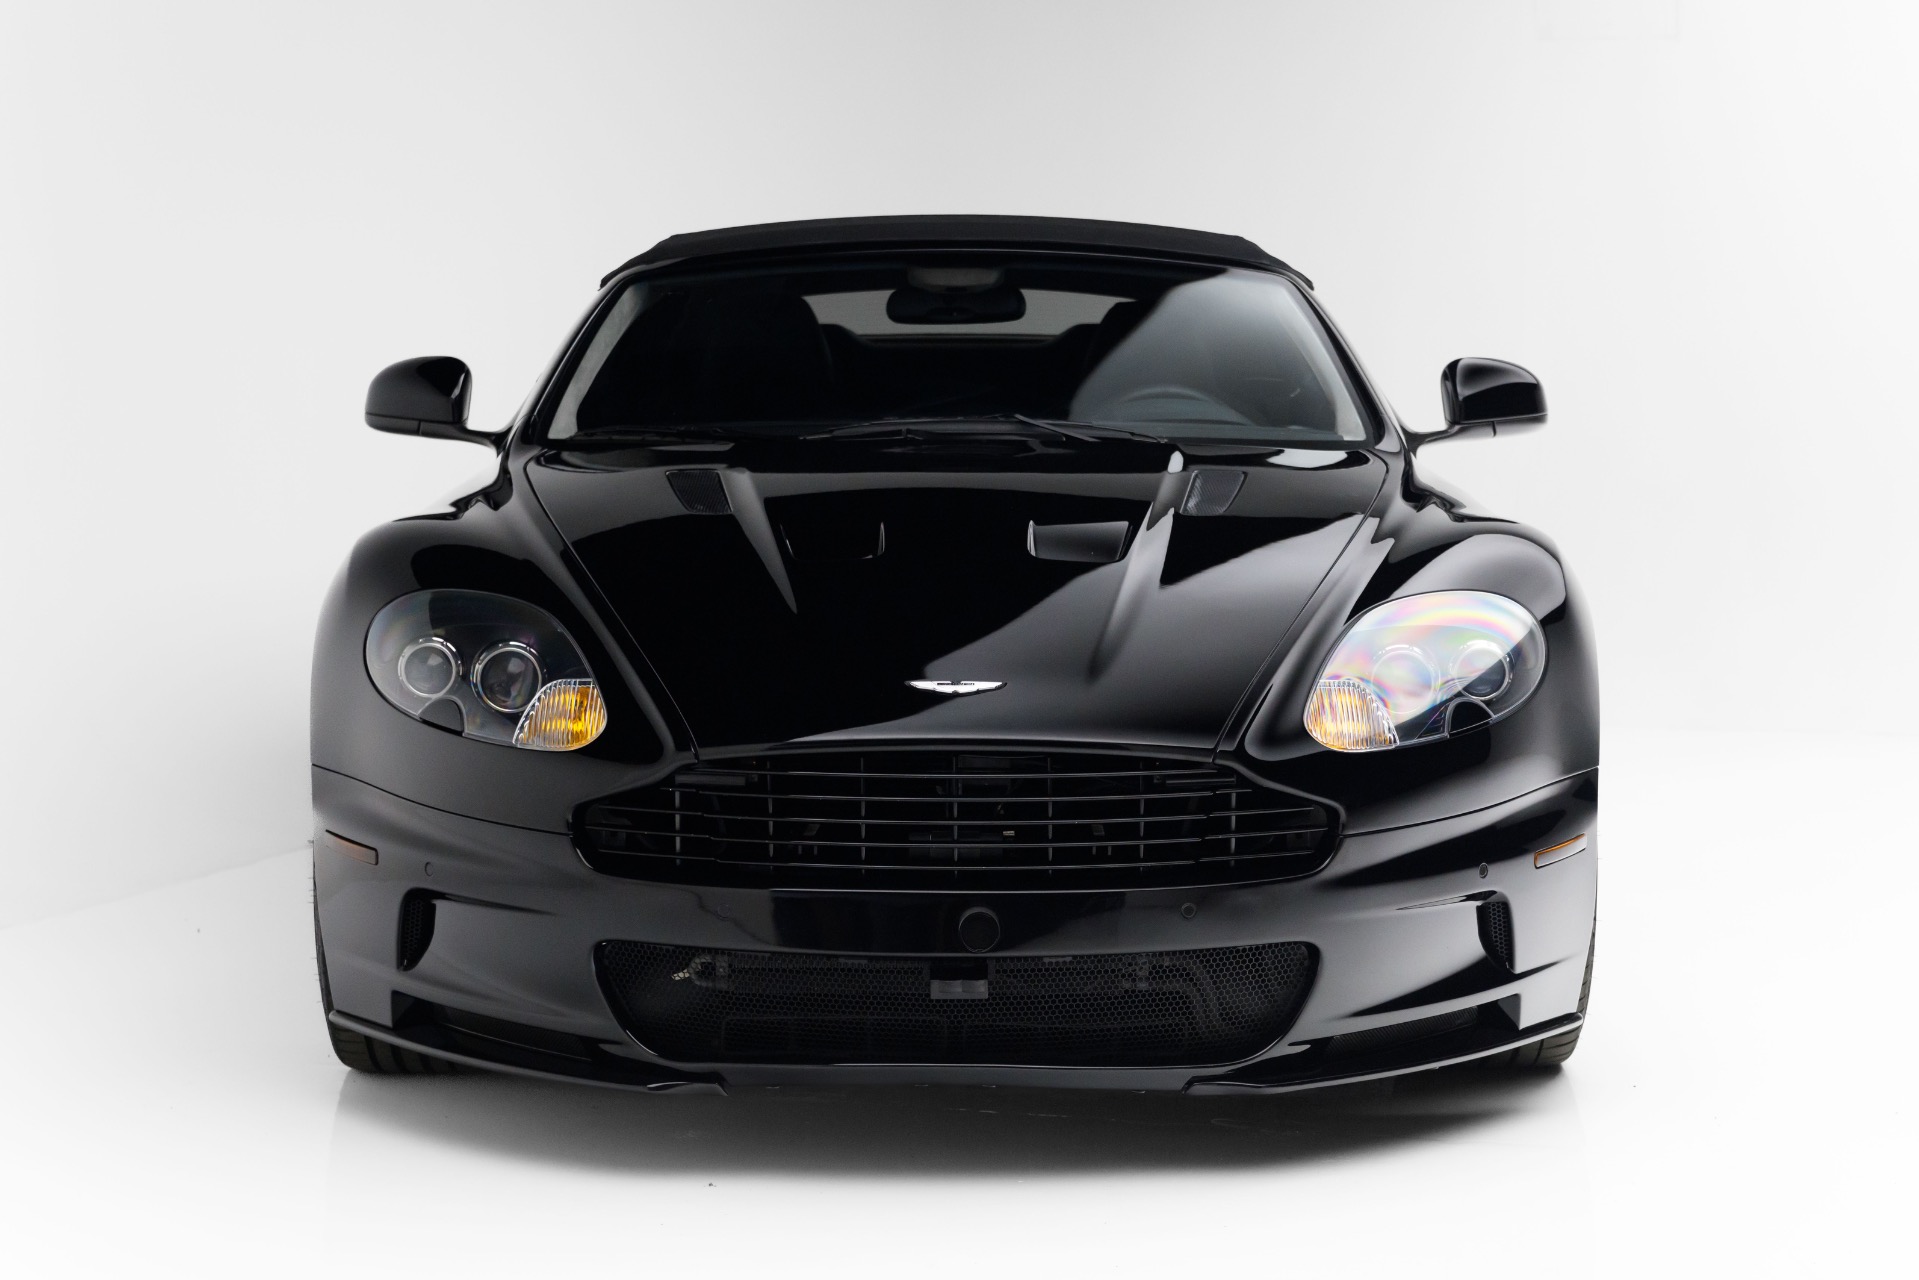 Used 2011 Aston Martin DBS For Sale (Sold)